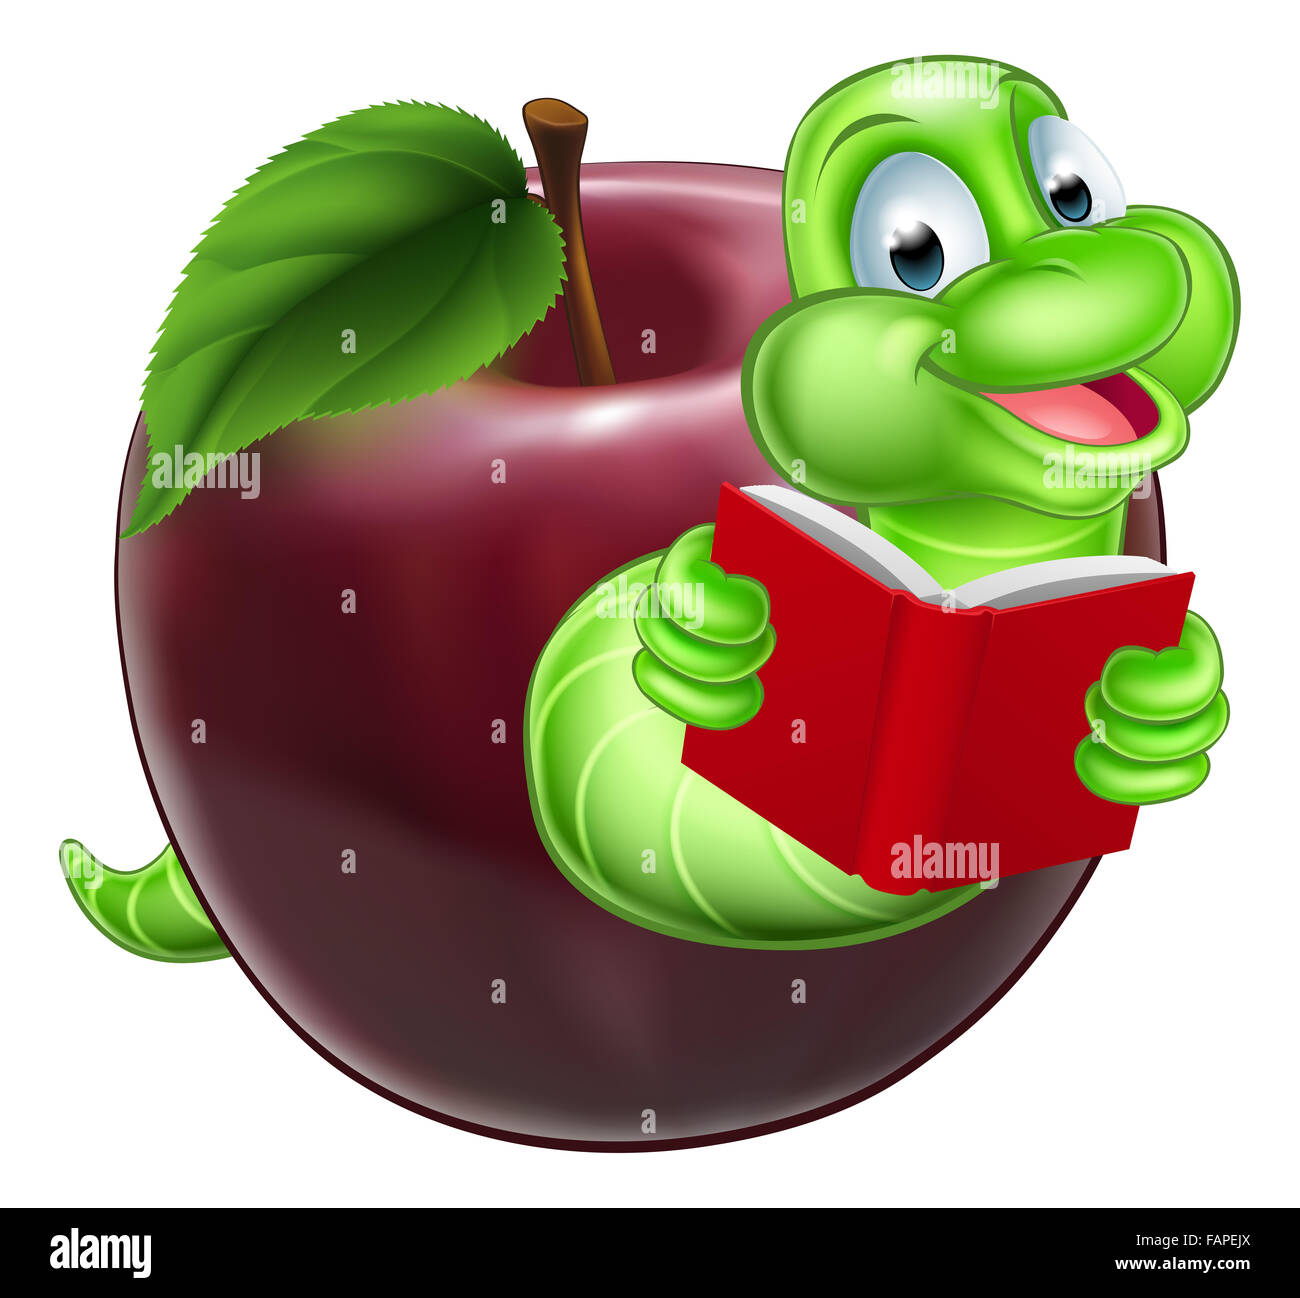 A happy smiling cute green cartoon caterpillar bookworm coming out of an apple and reading a book Stock Photo